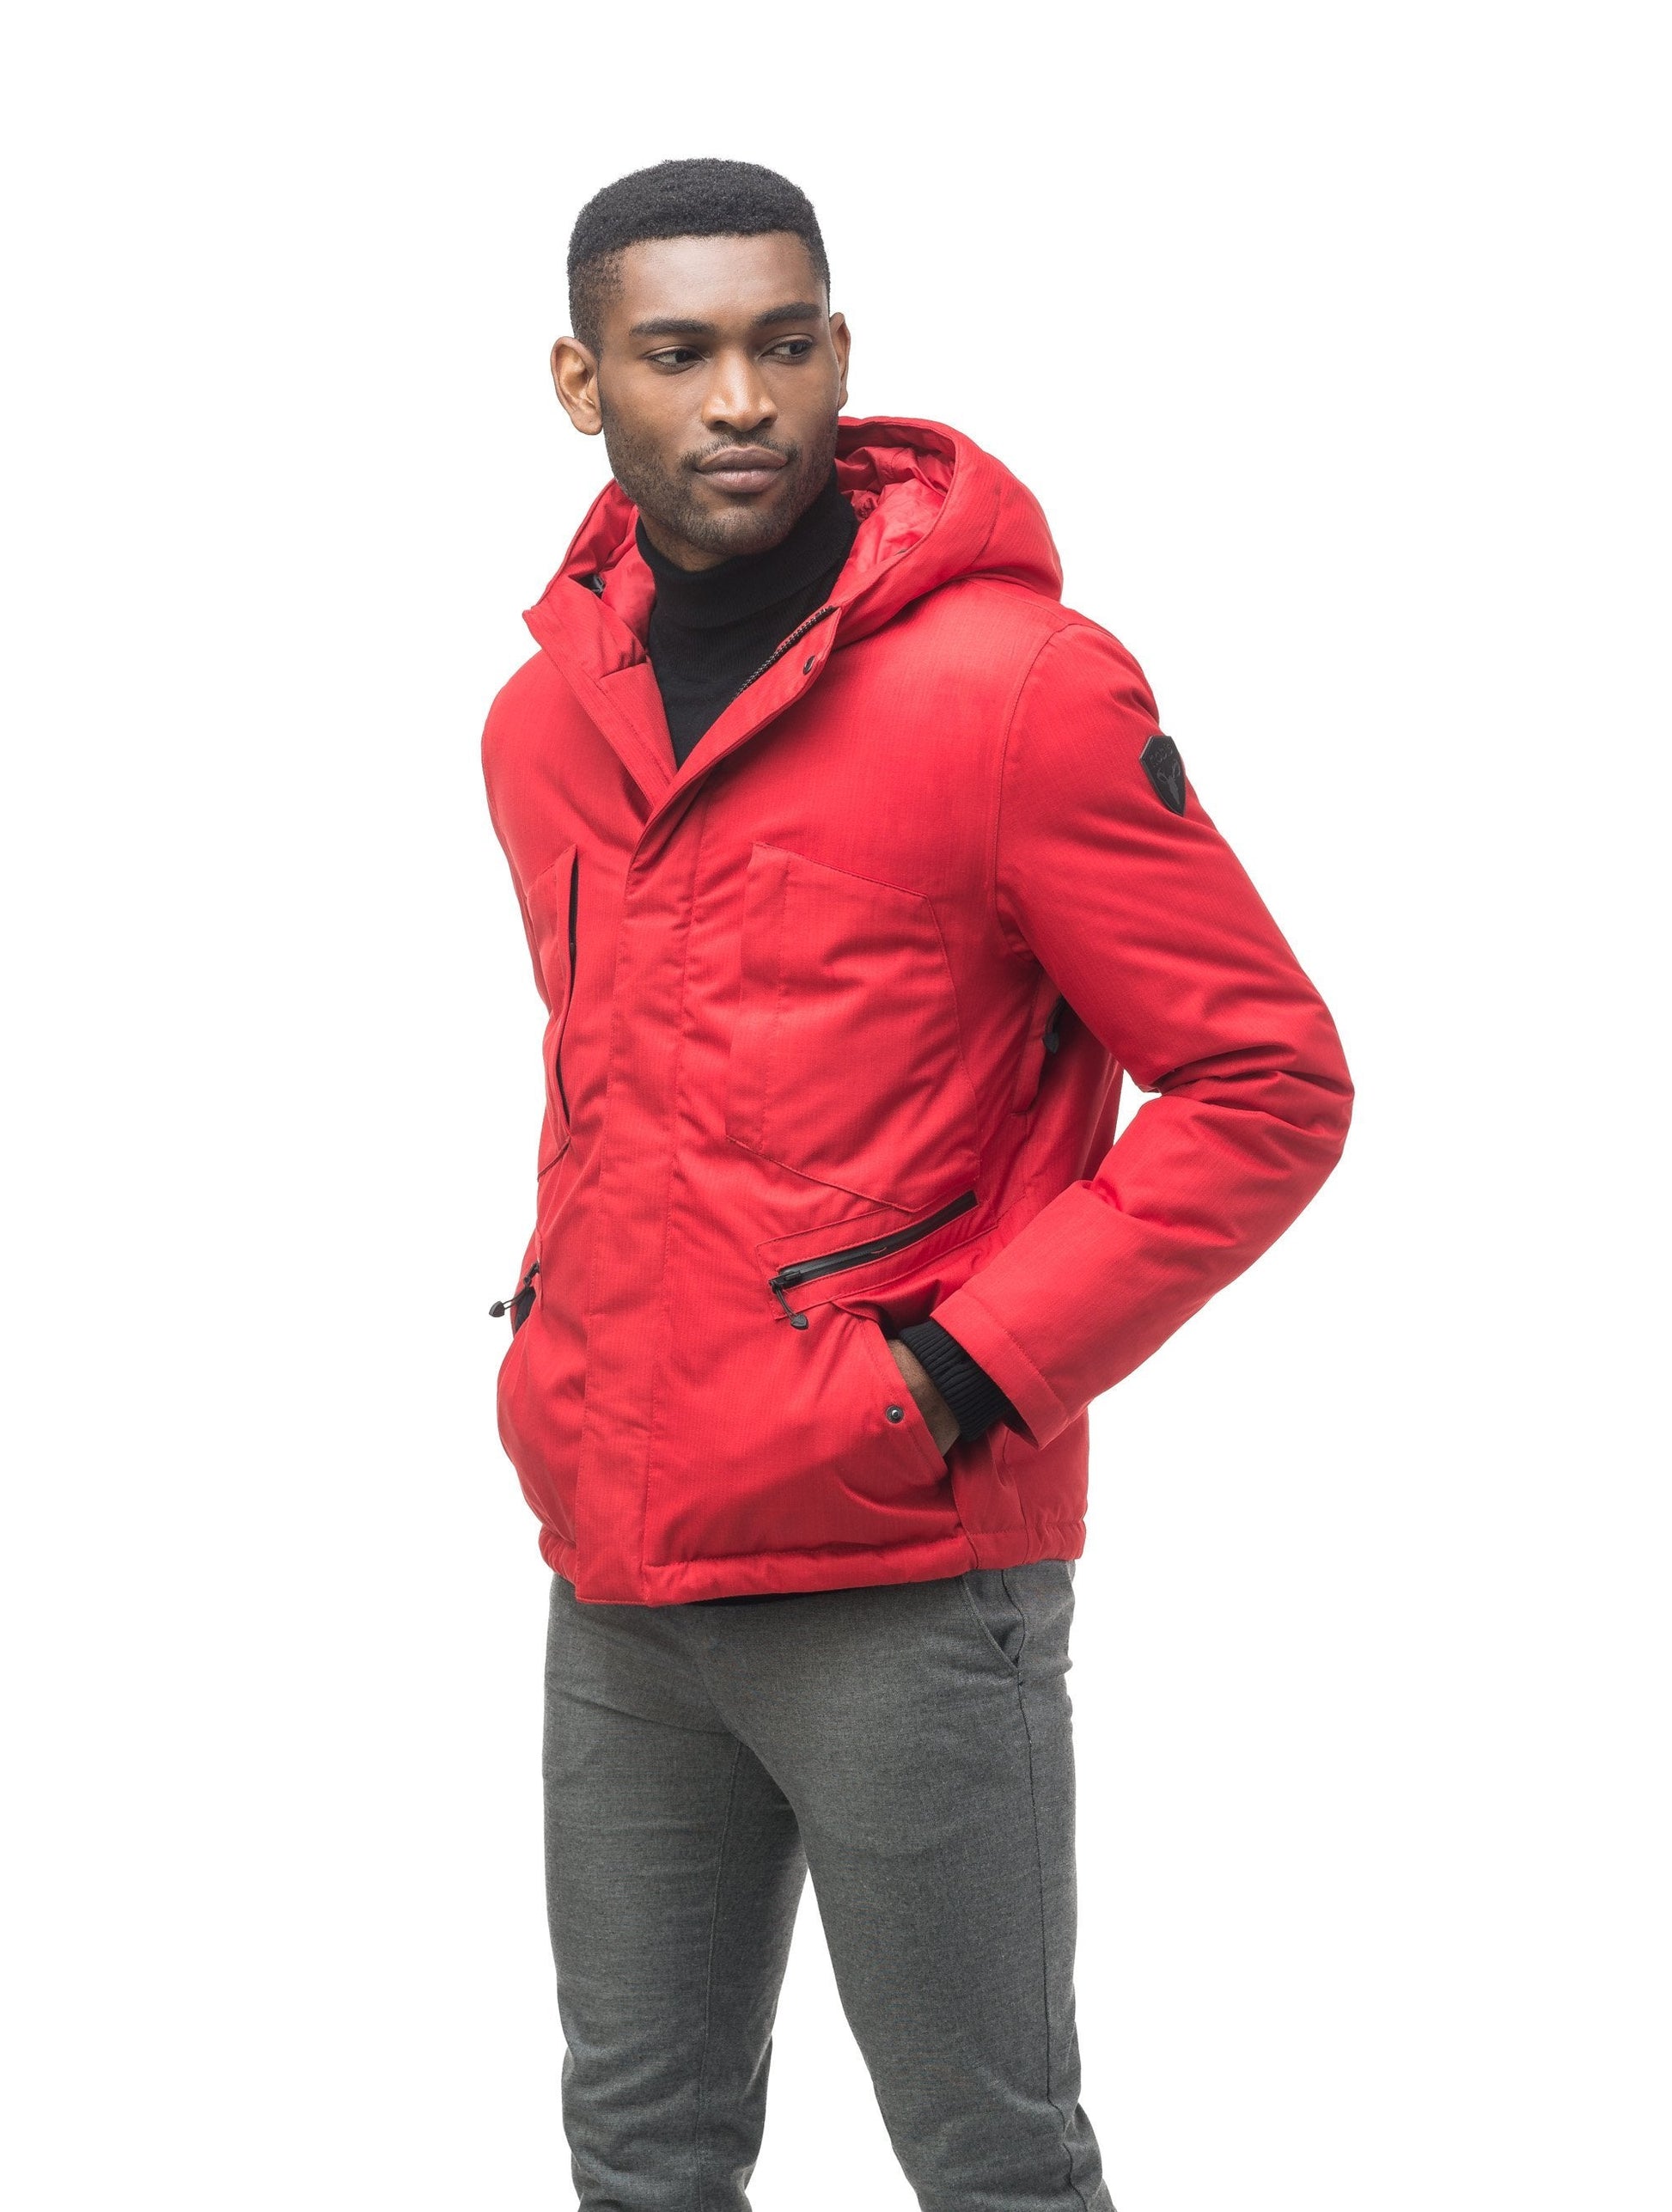 Men's waist length light down coat equipped with six exterior pockets and a hood in Red